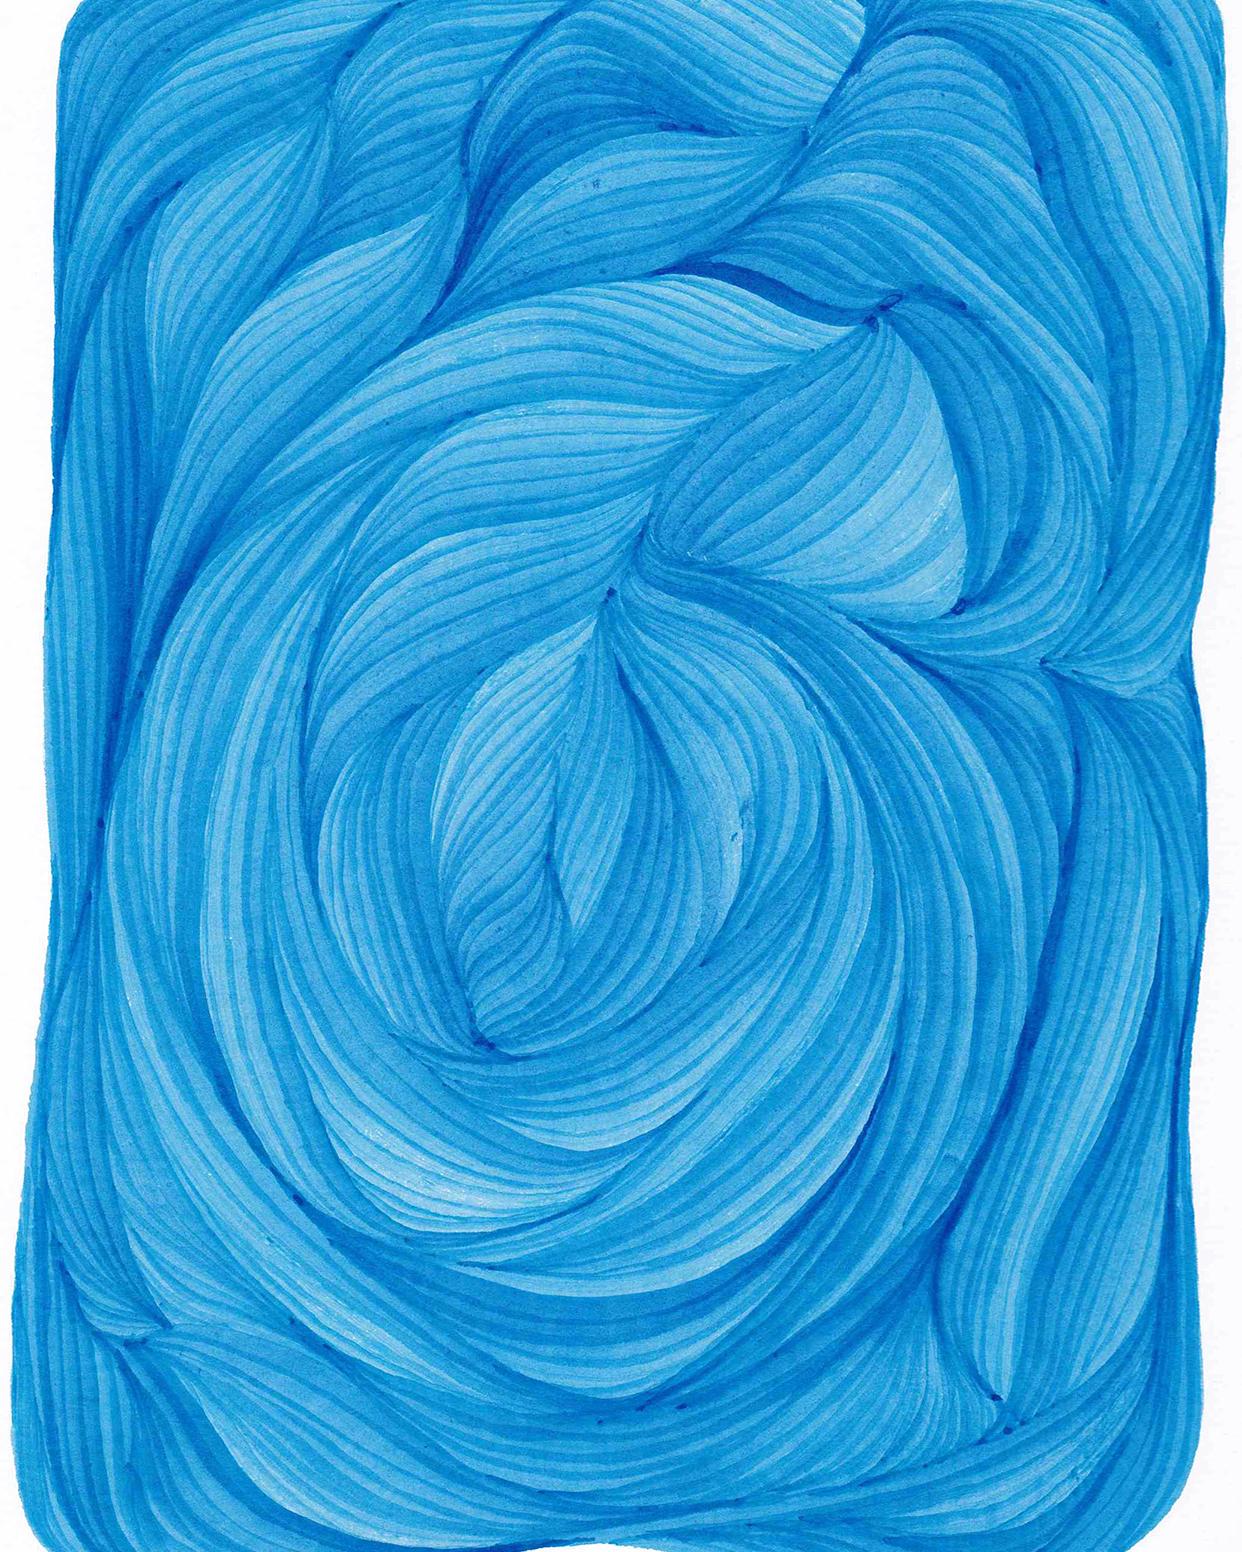 Lines 4 - abstract geometric bright blue ink drawing on paper - Art by Dana Piazza